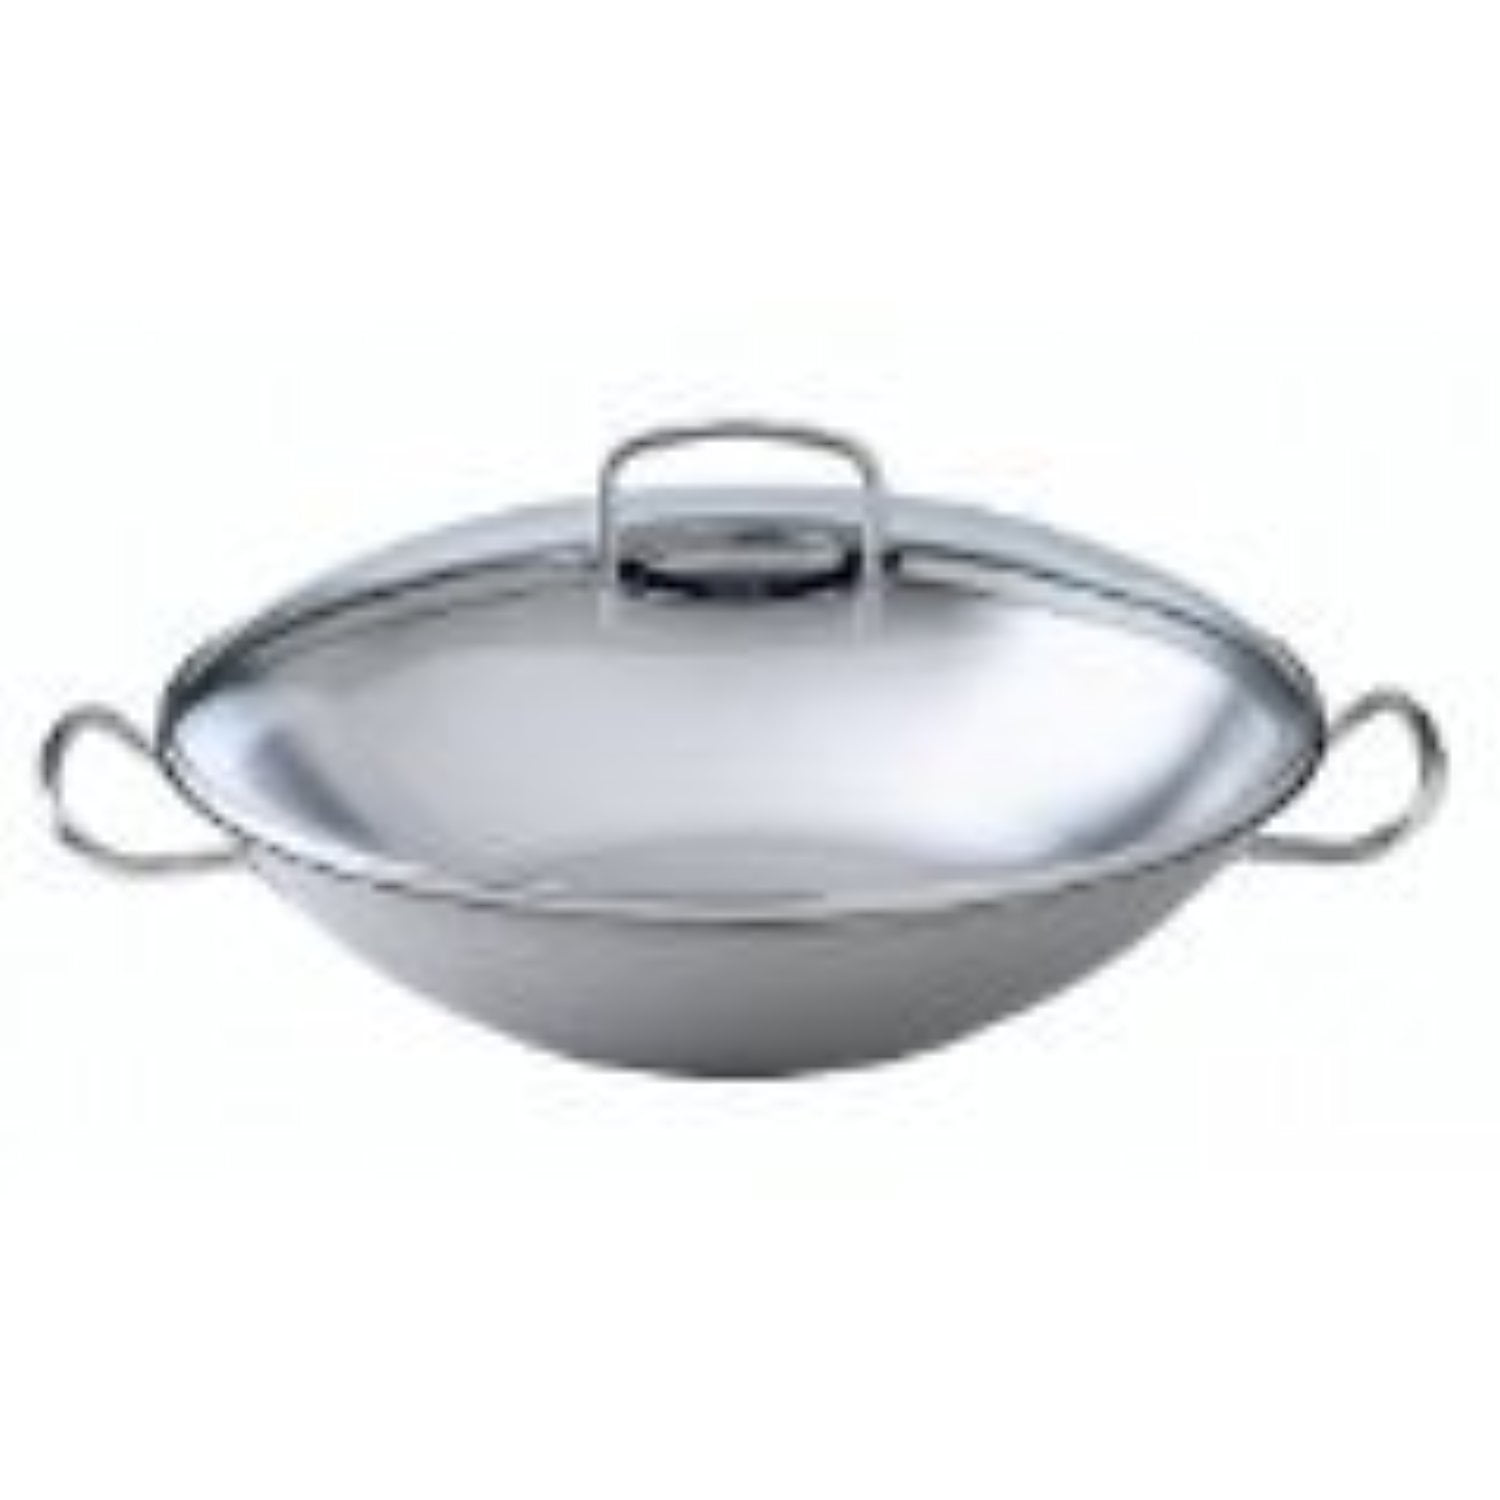 Original-Profi Wok Collection® Fissler with Glass Steel 2019 Stainless Lid